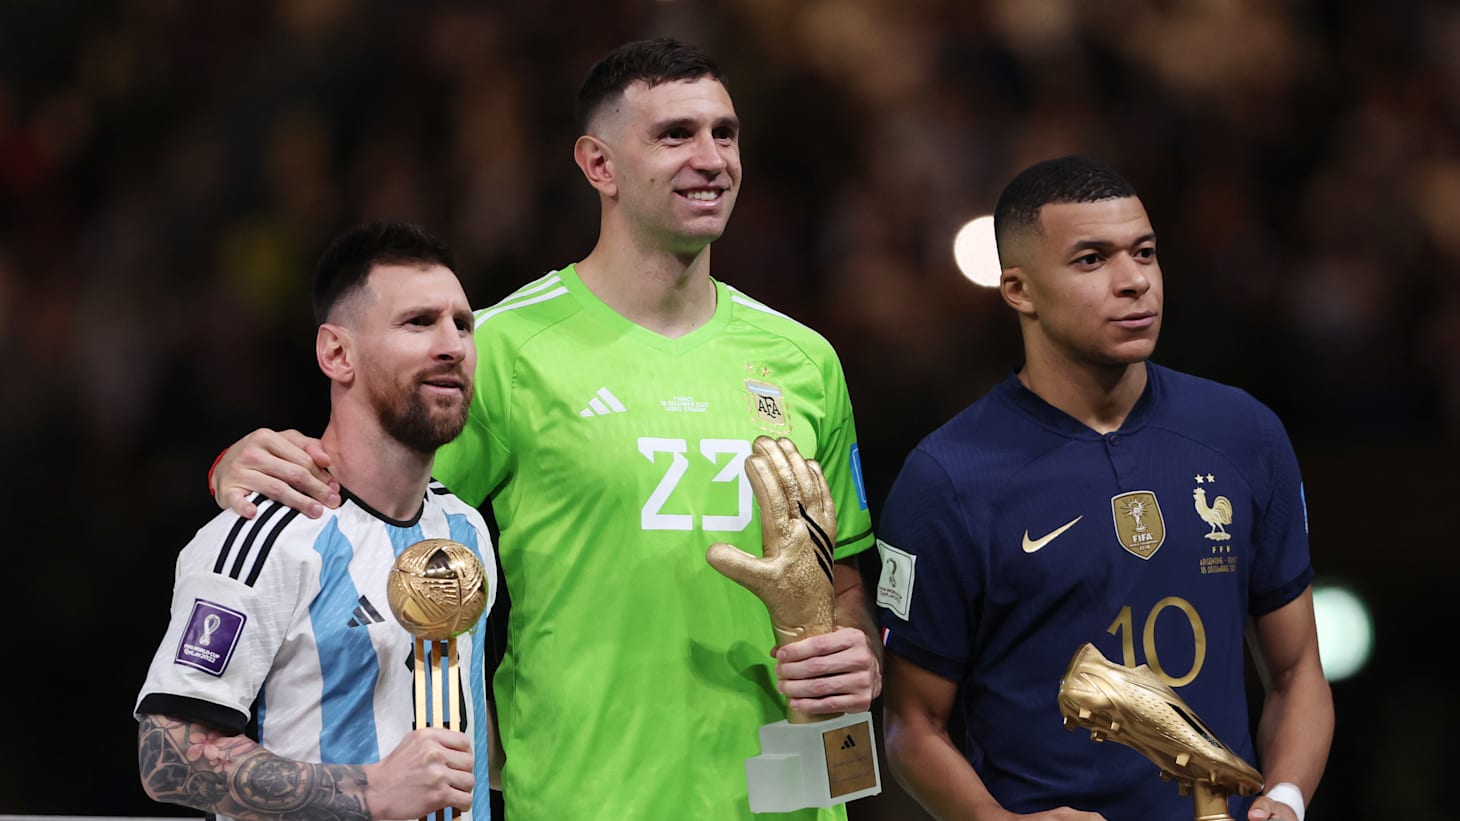 ⚽ FIFA World Cup 2022, Lionel Messi wins Golden Ball for best player;  Mbappe takes Golden Boot